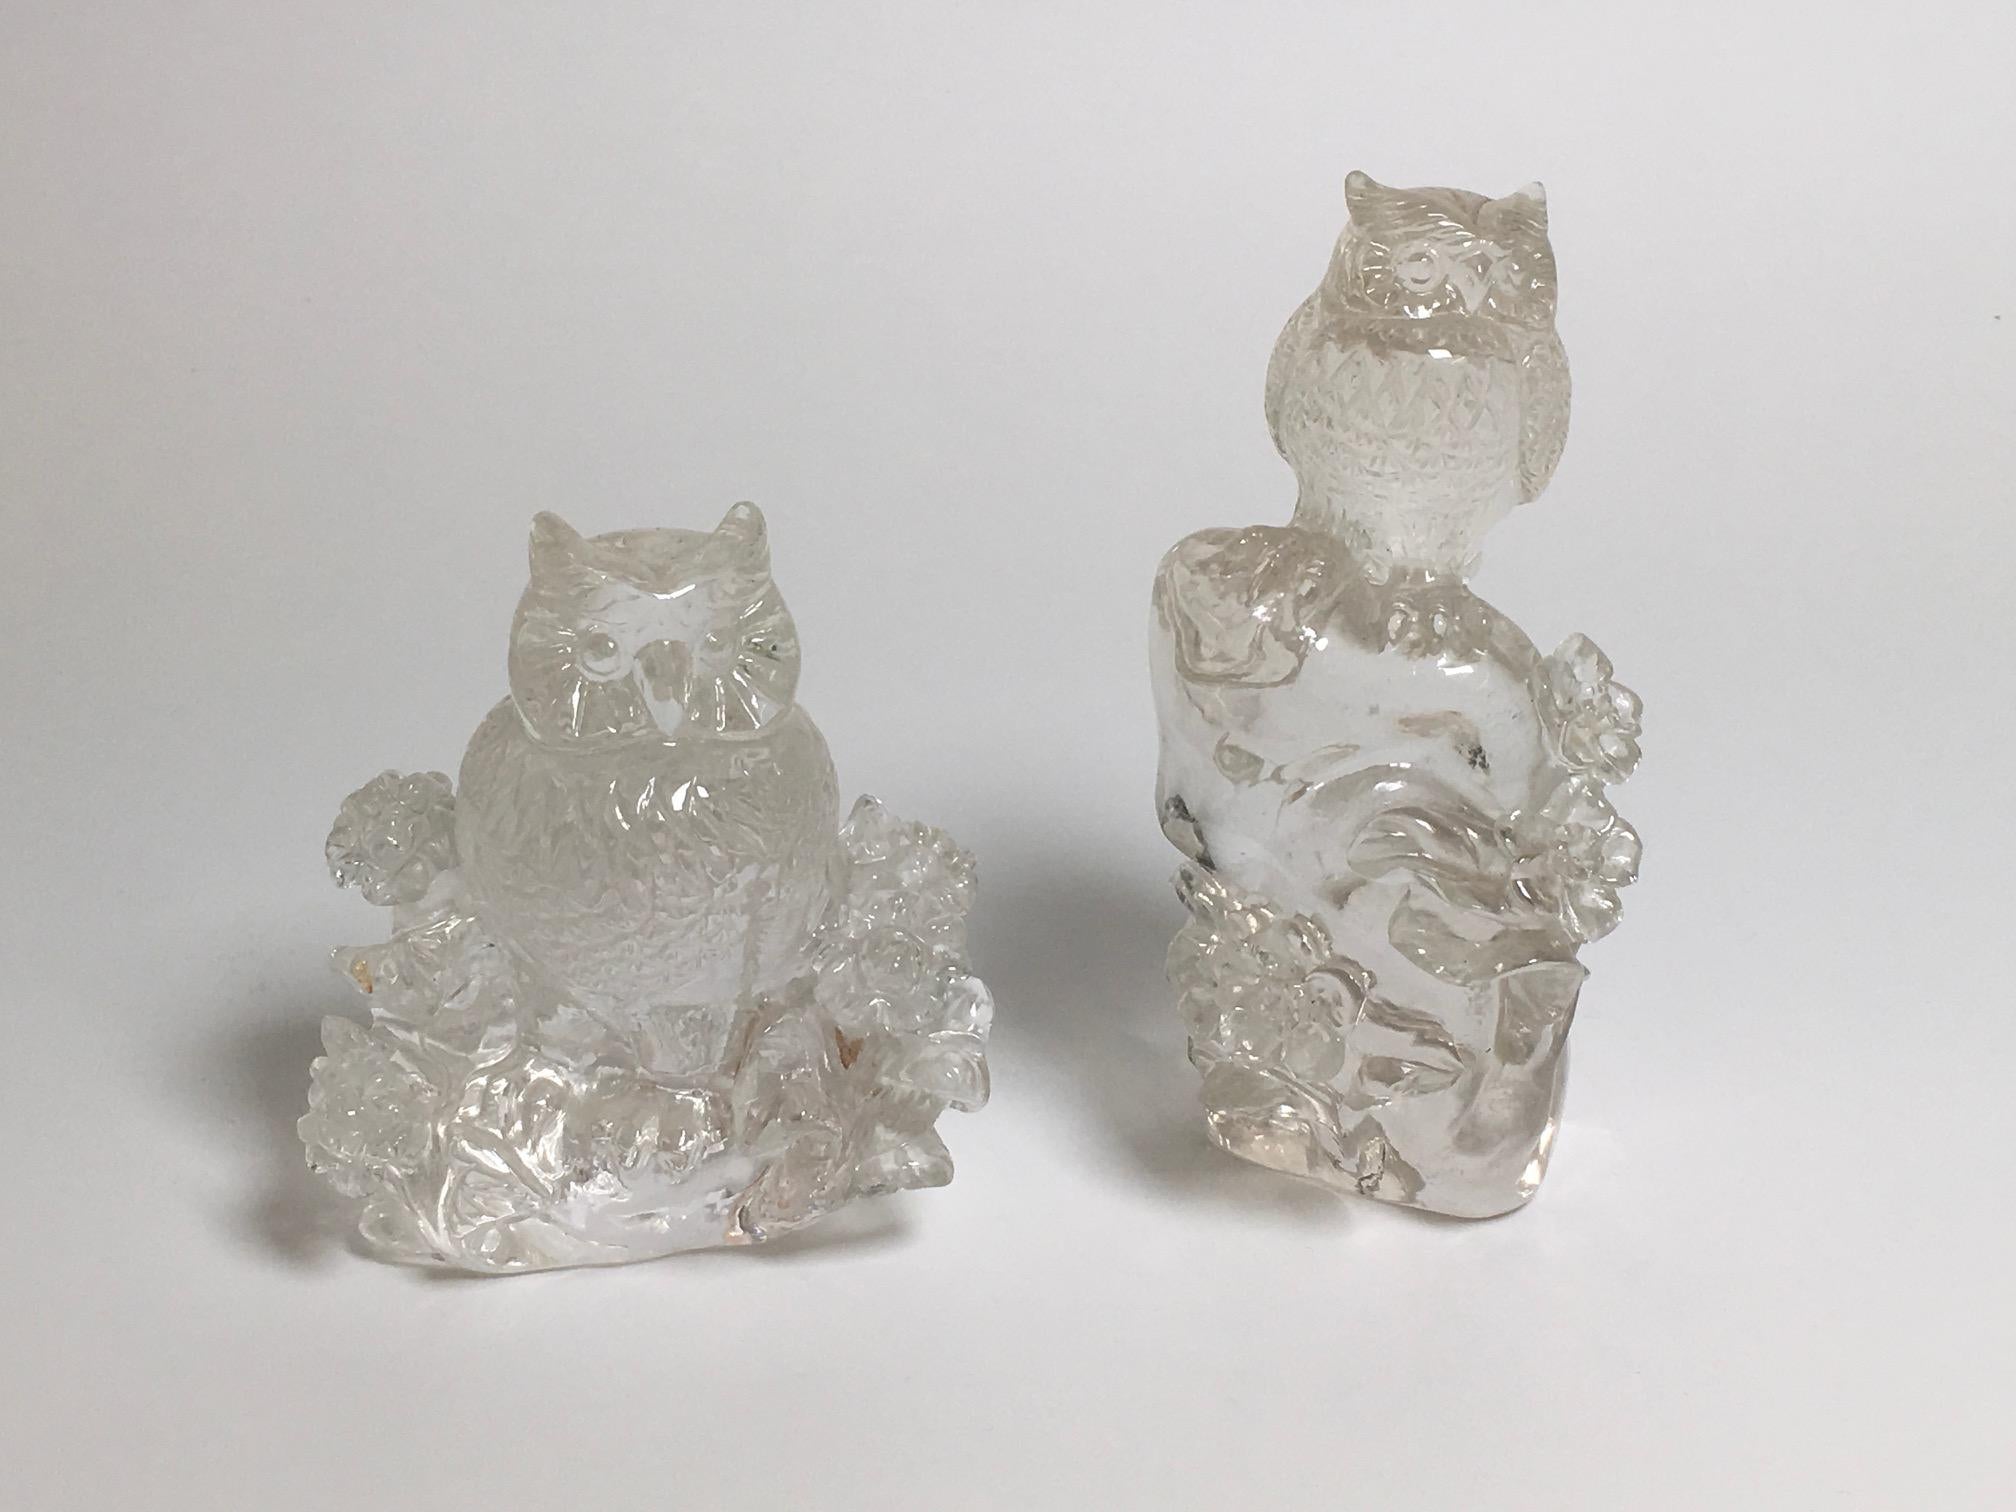 A beautiful sculptures in Hyaline quartz ‘rock crystal’ produced in China. Italian private collection.
The dimensions are H 16 cm x W 7 cm X D 7 cm - H 12 cm x W 10 cm x D 6 cm.